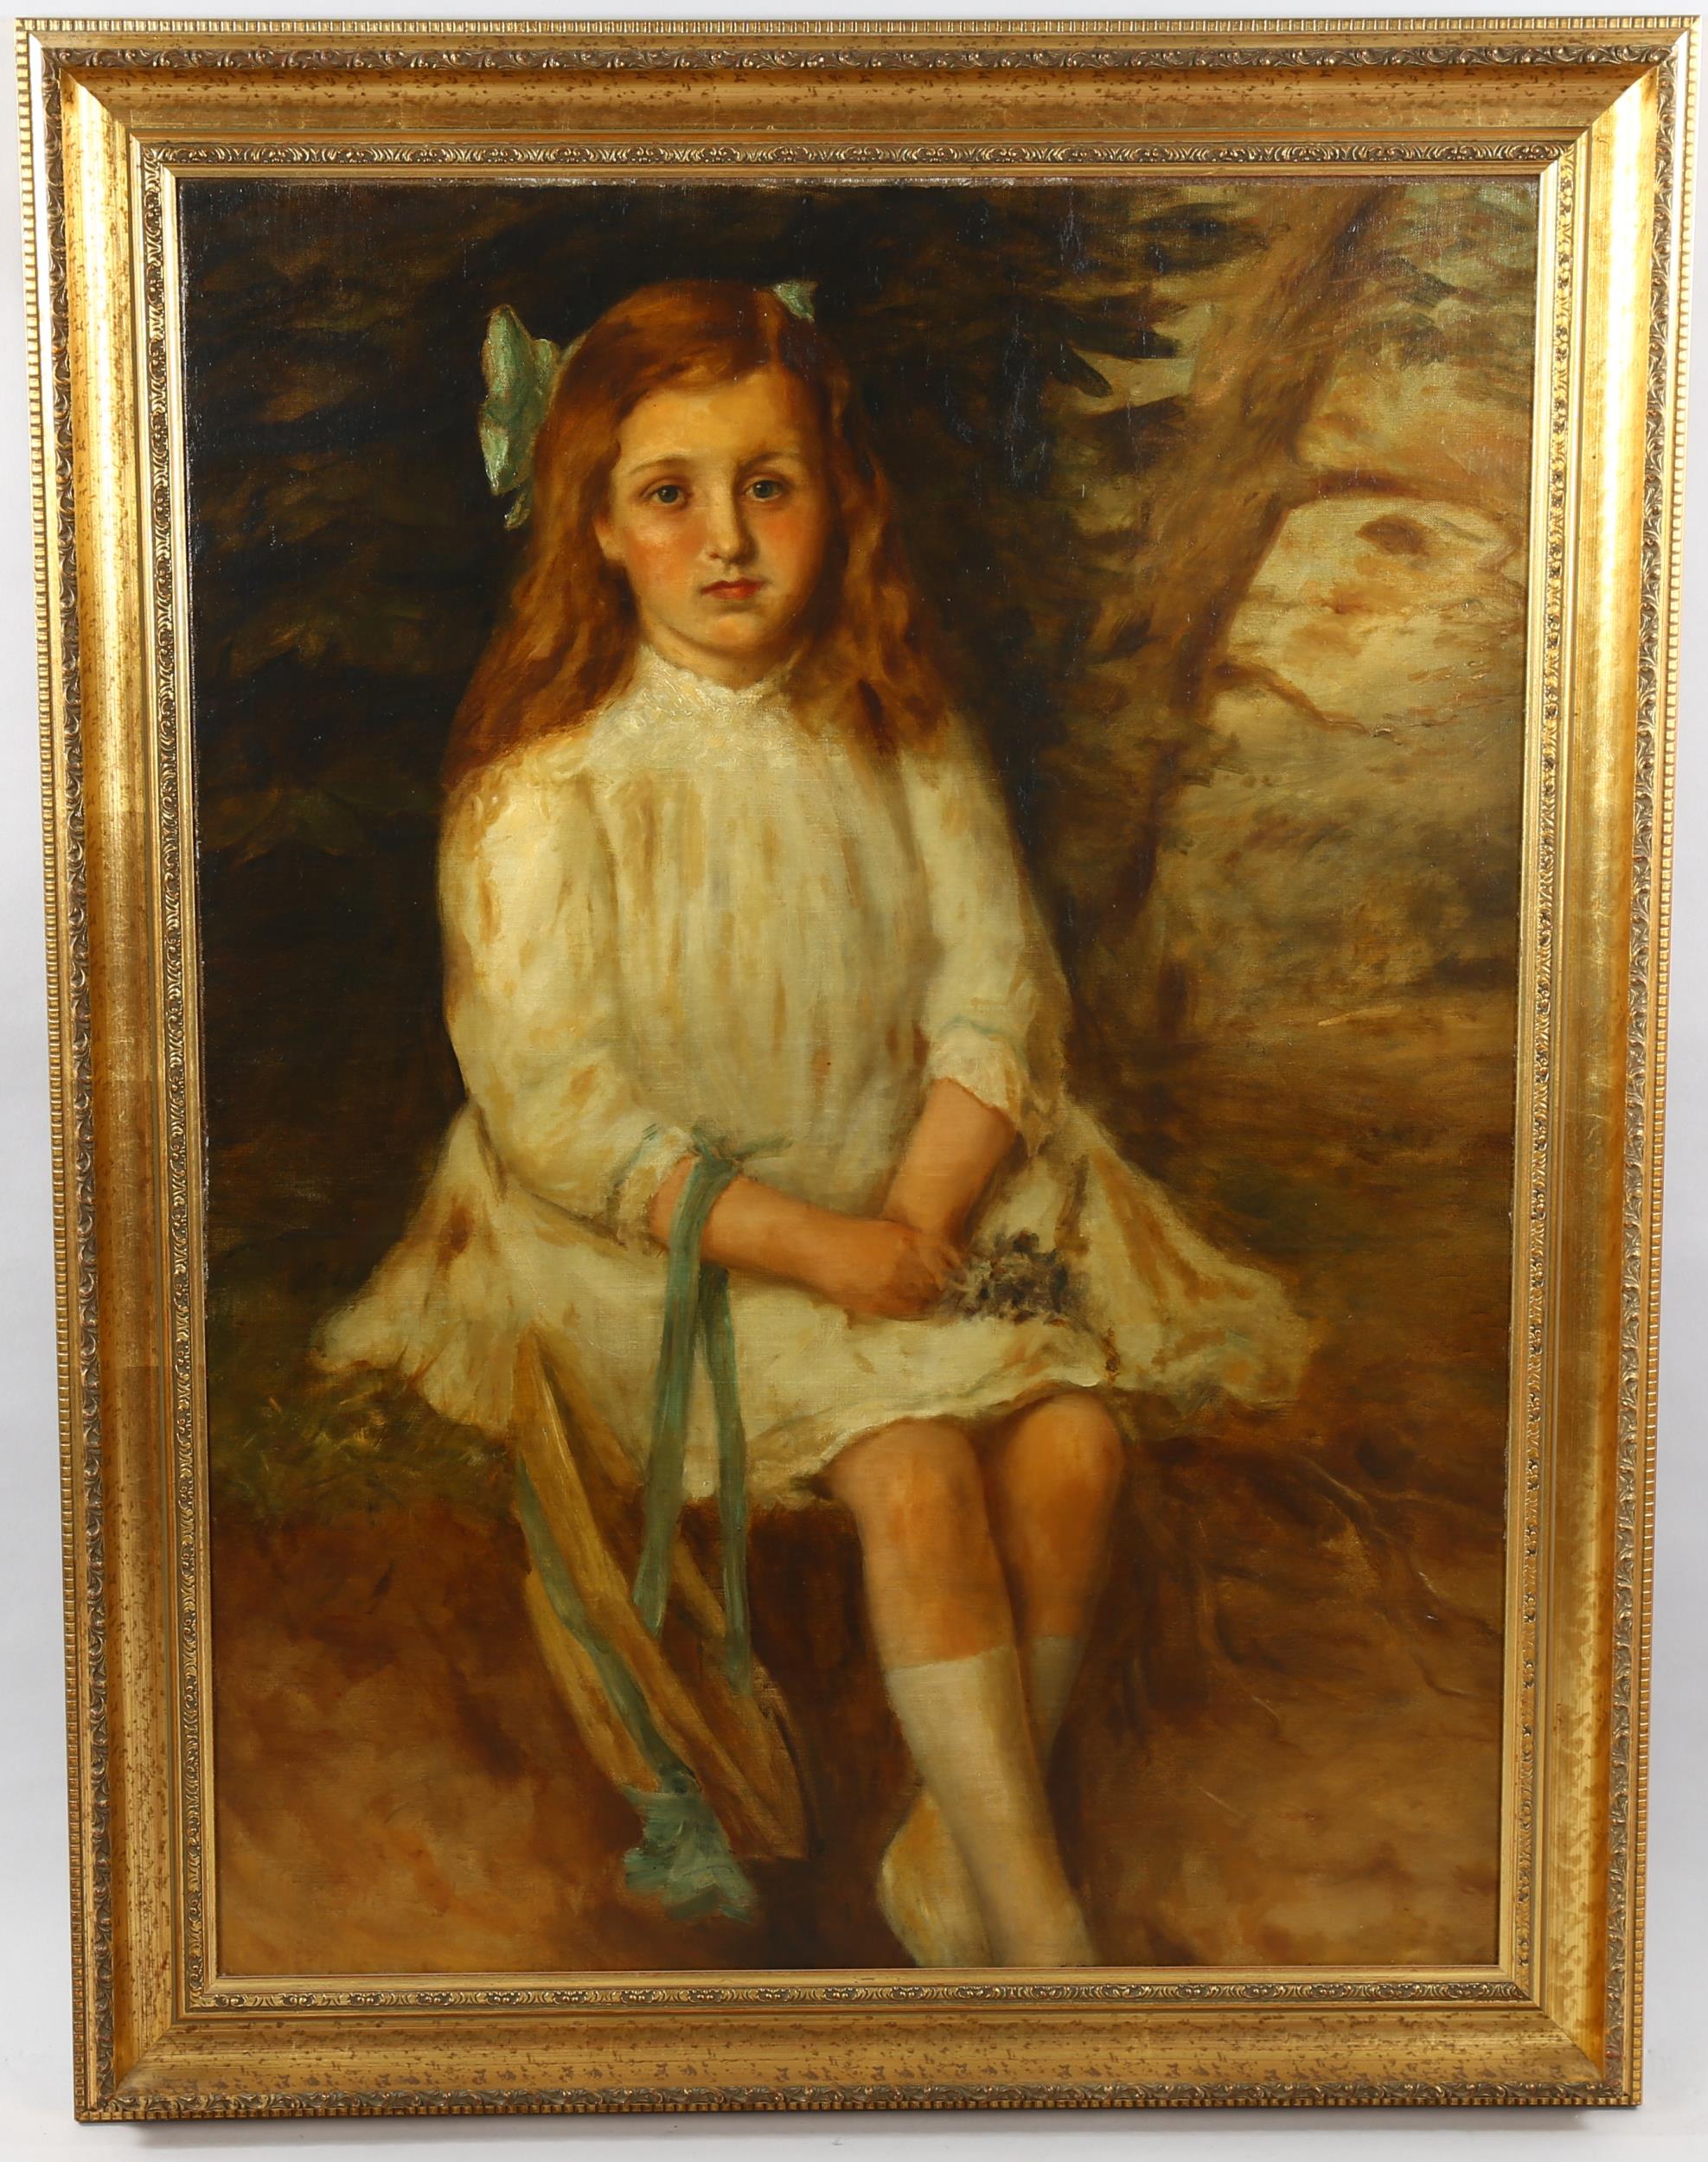 19th century oil on canvas, portrait of a girl, unsigned, 94cm x 68cm, framed Canvas has been